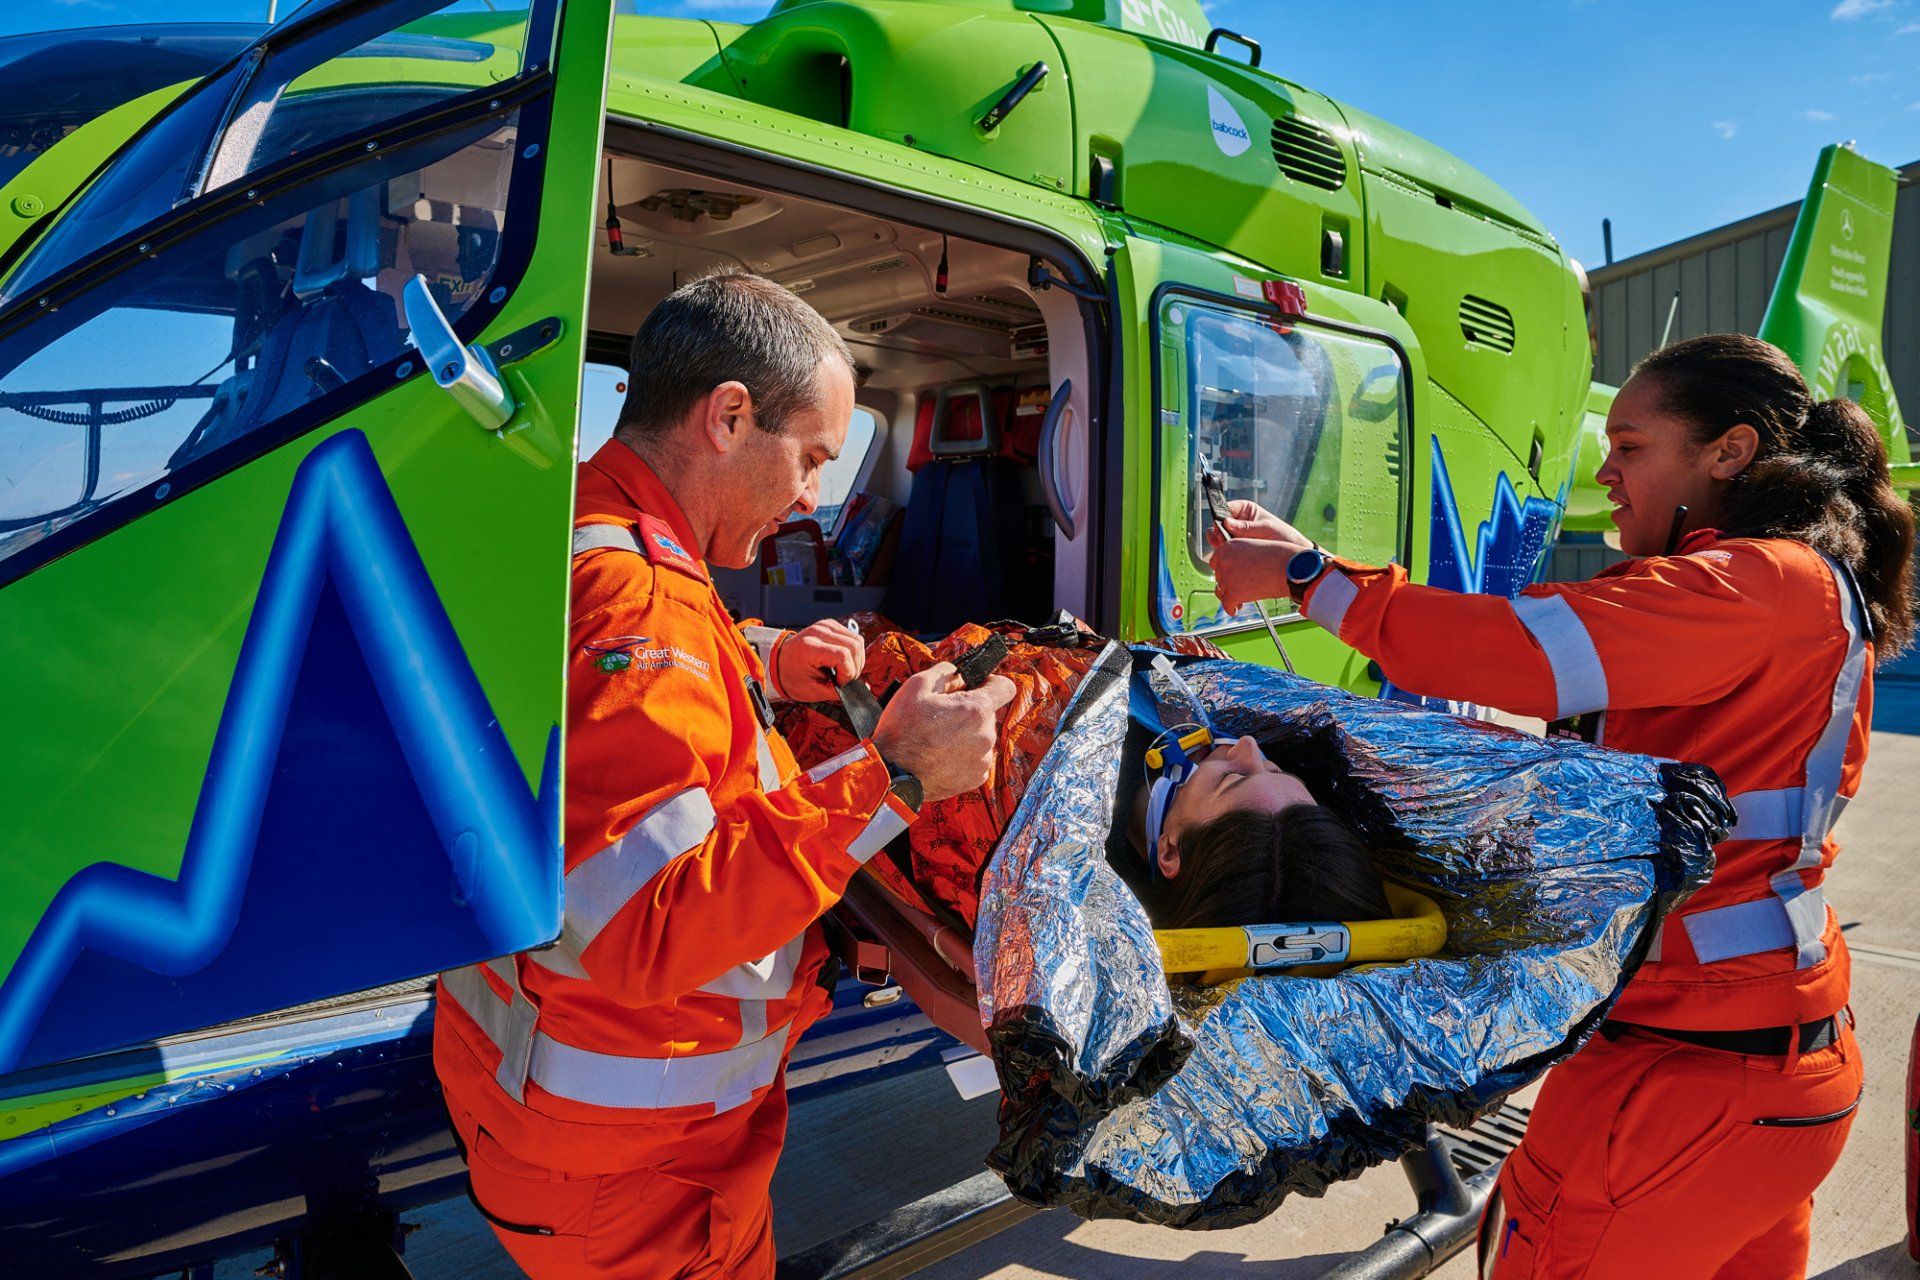 The Randal Charitable Foundation proudly supports the Great Western Air Ambulance